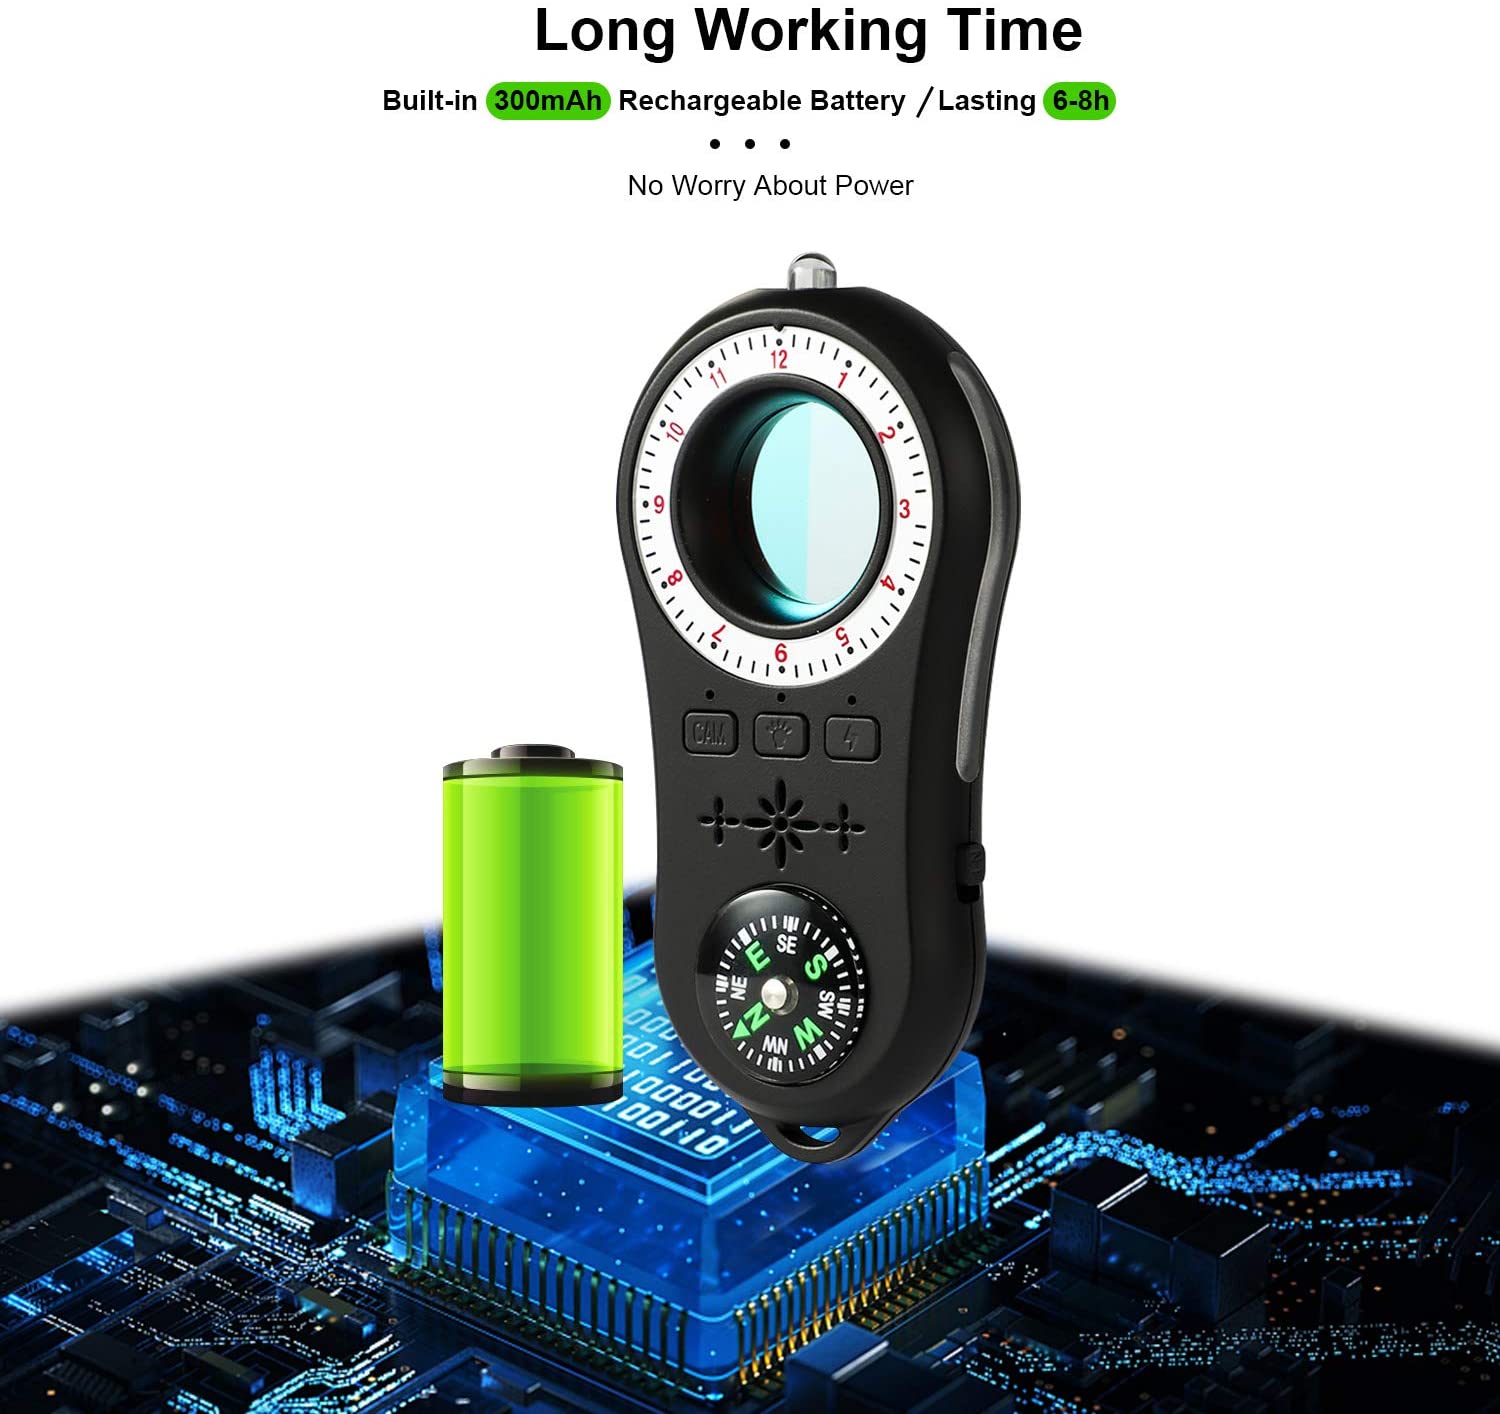 Hidden Camera Detector With Compass and Flash Light